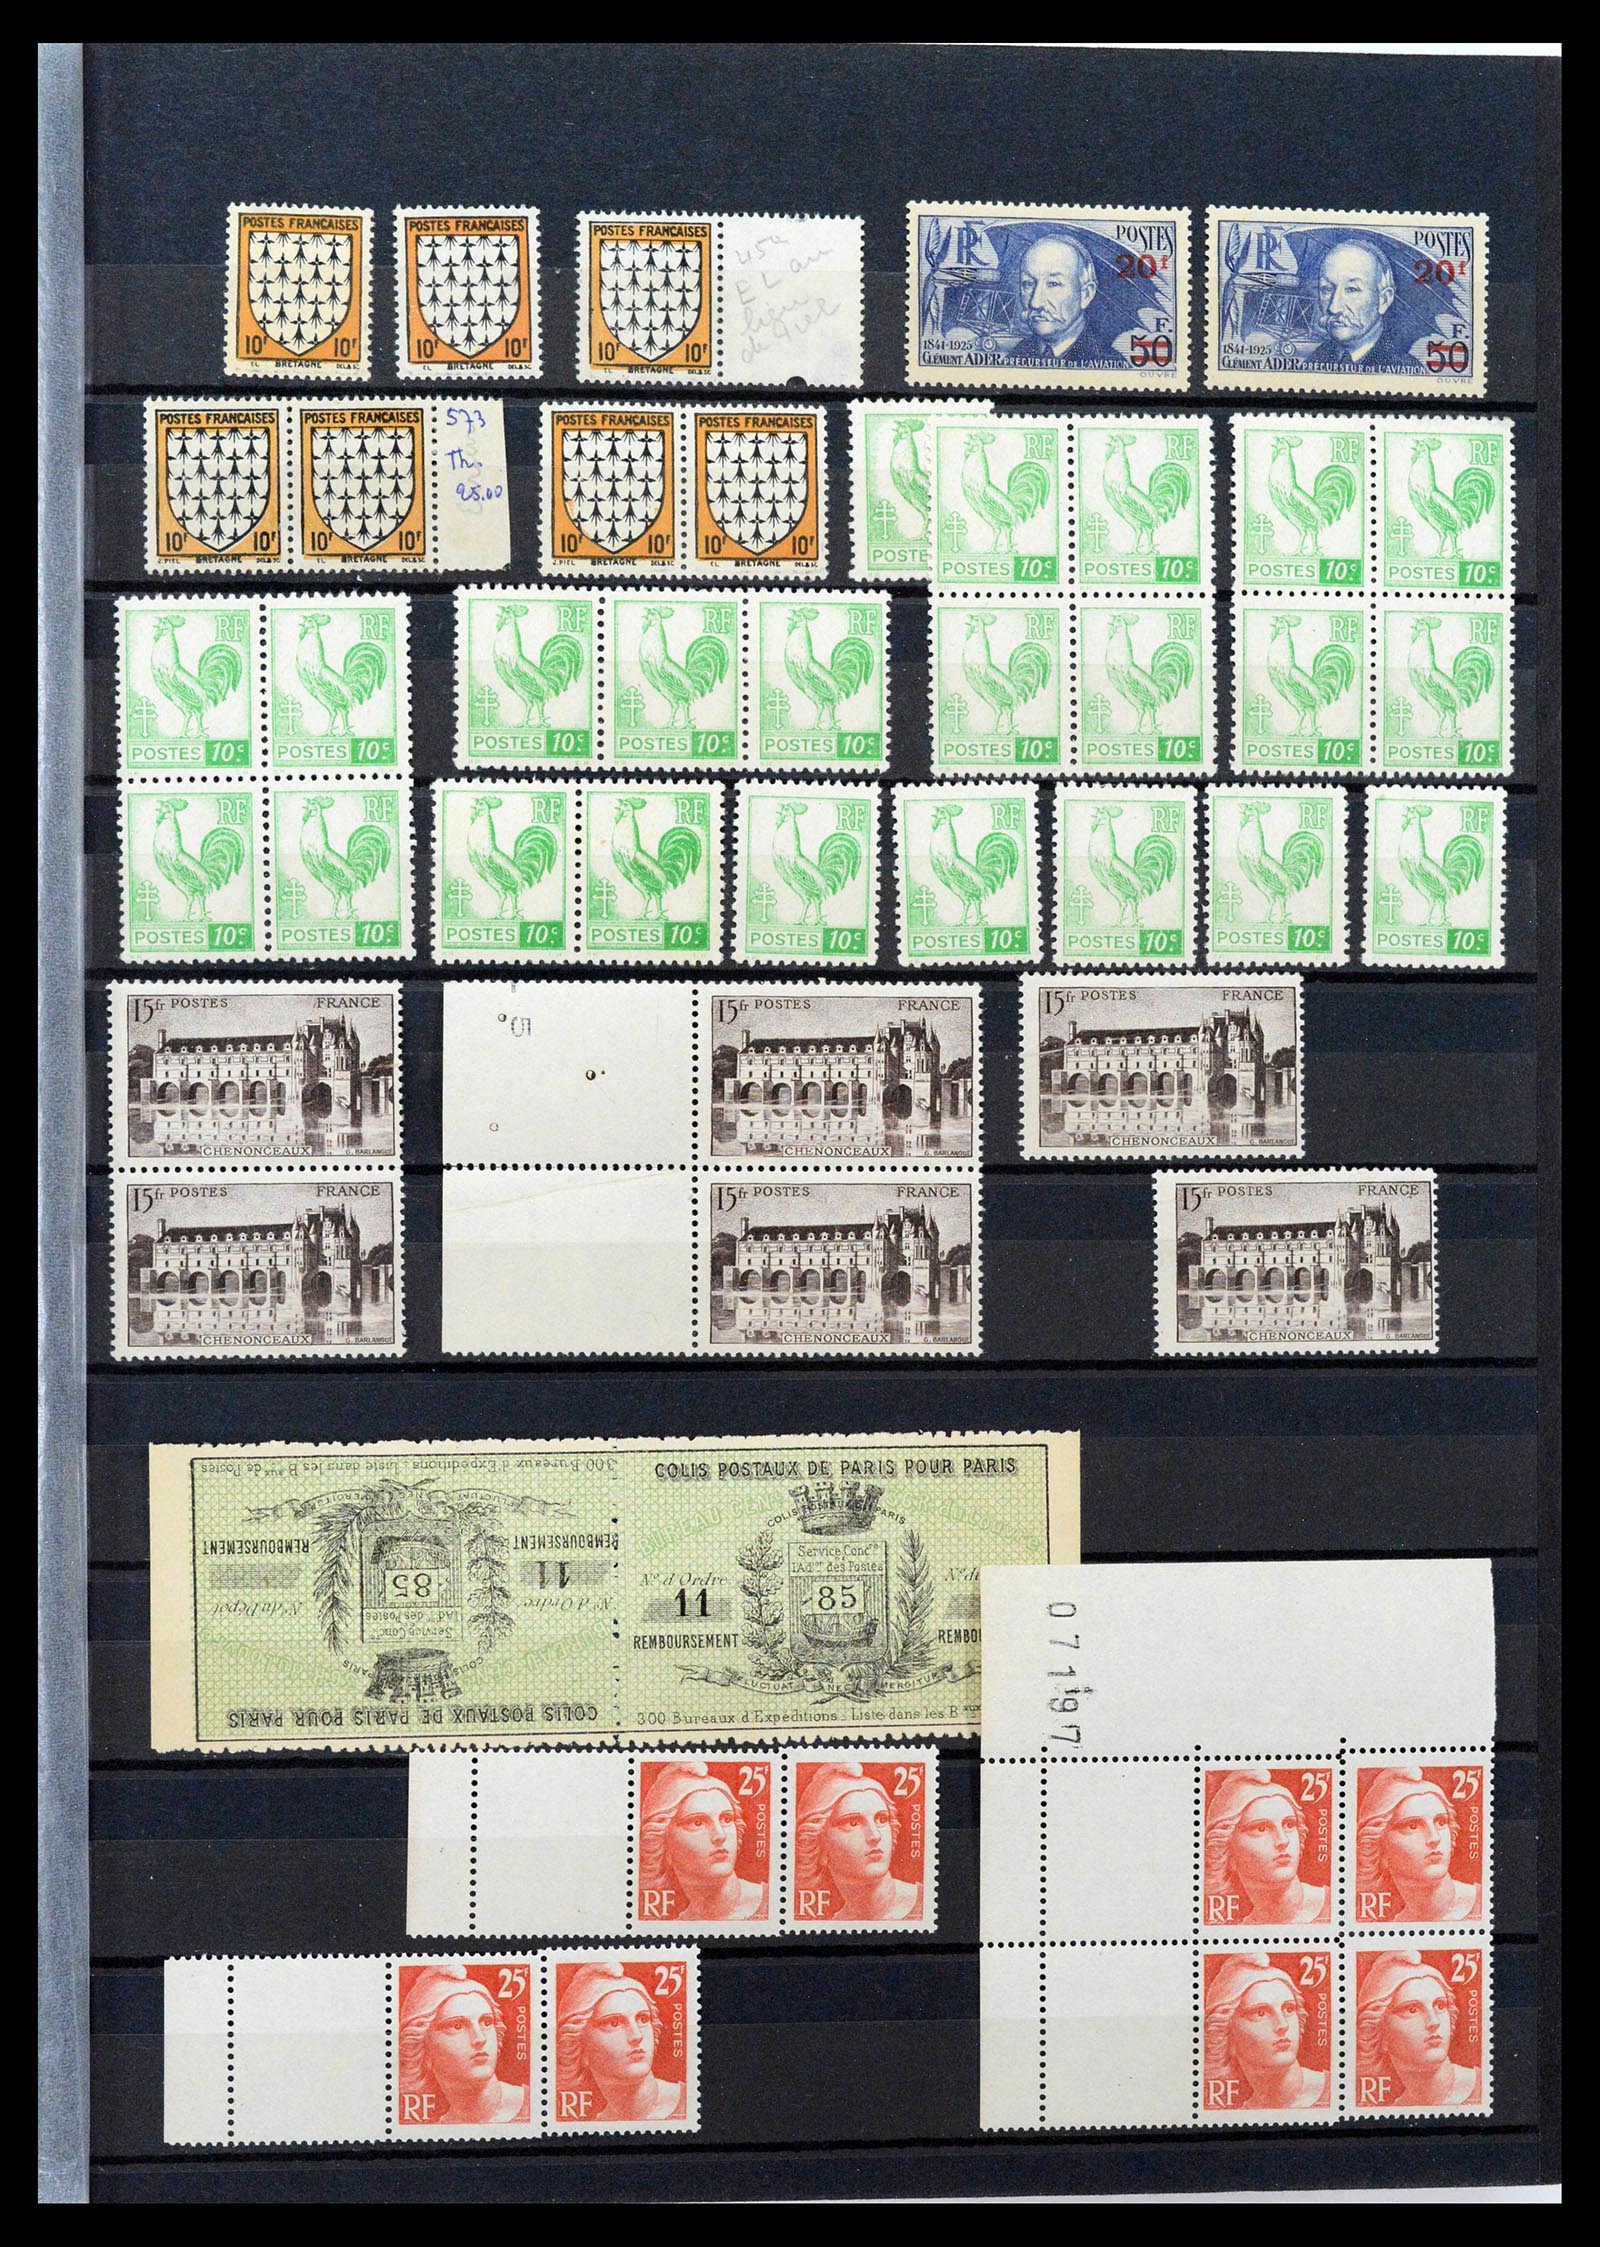 39423 0007 - Stamp collection 39423 France varieties 1862-1985.